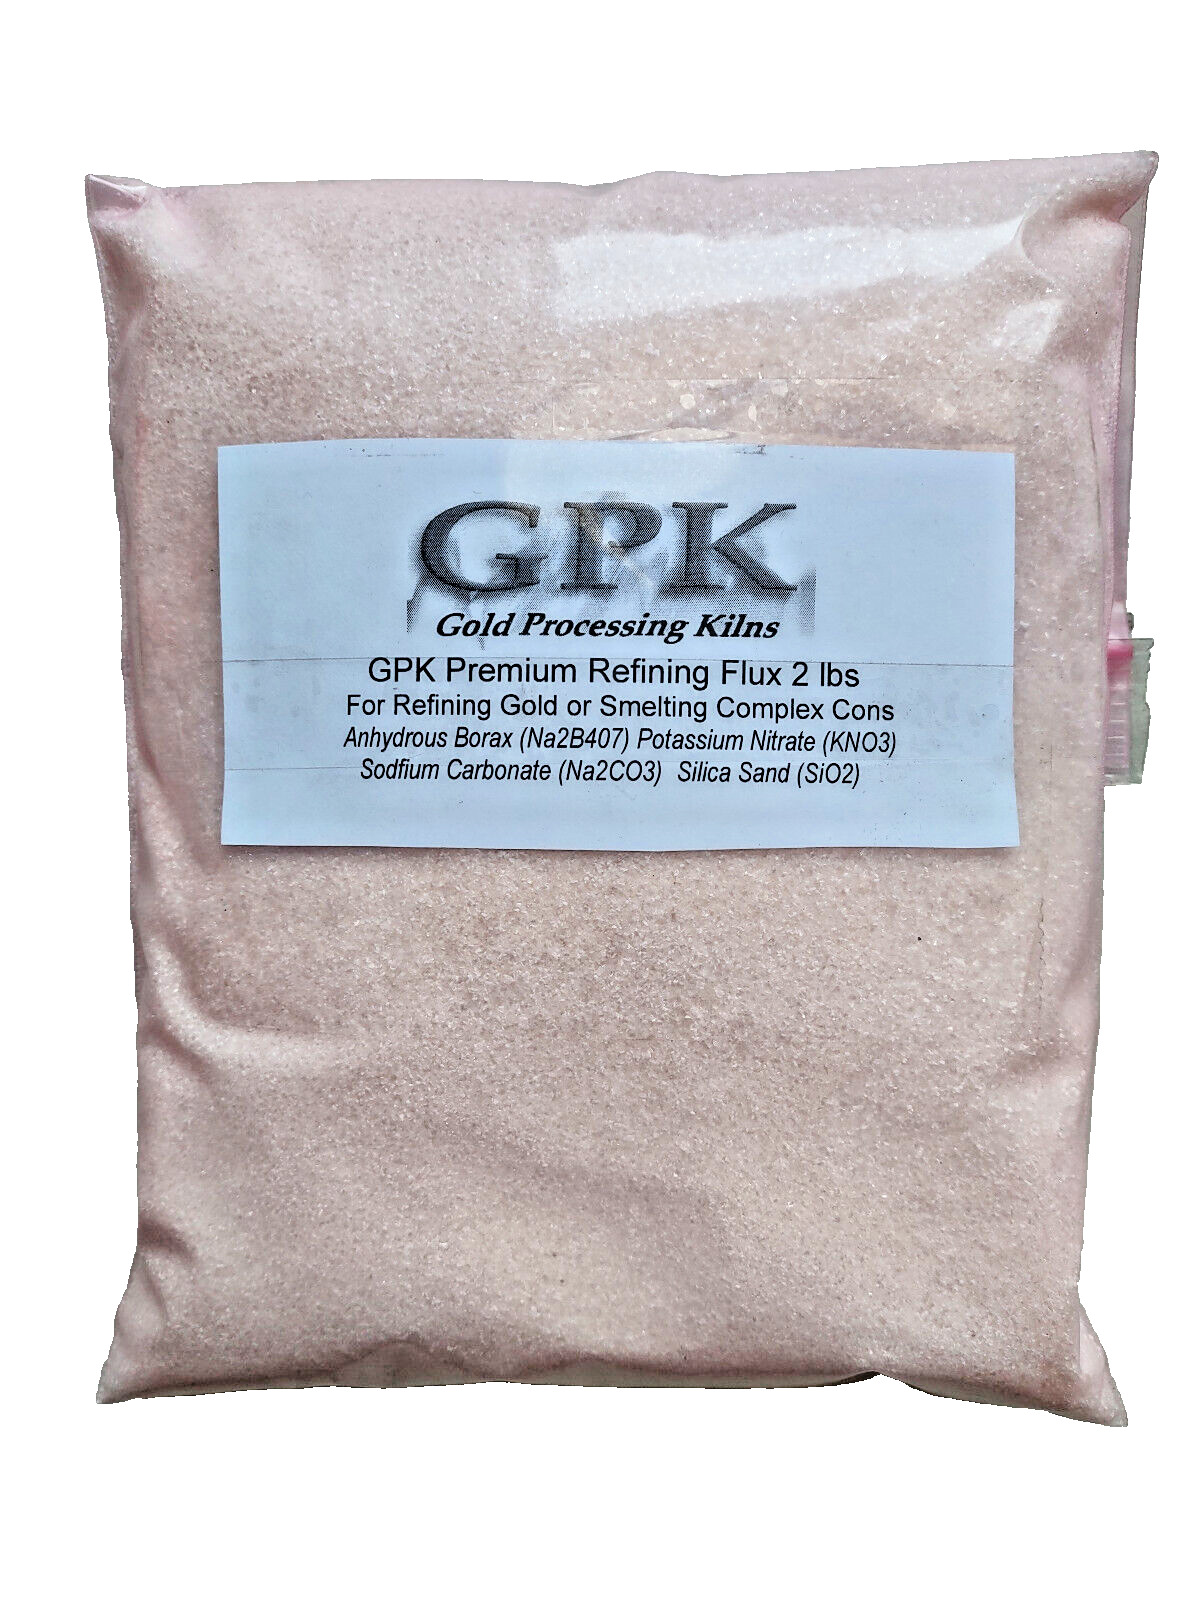 GPK Premium Refining Flux for Gold and Complex Ore Concentrates